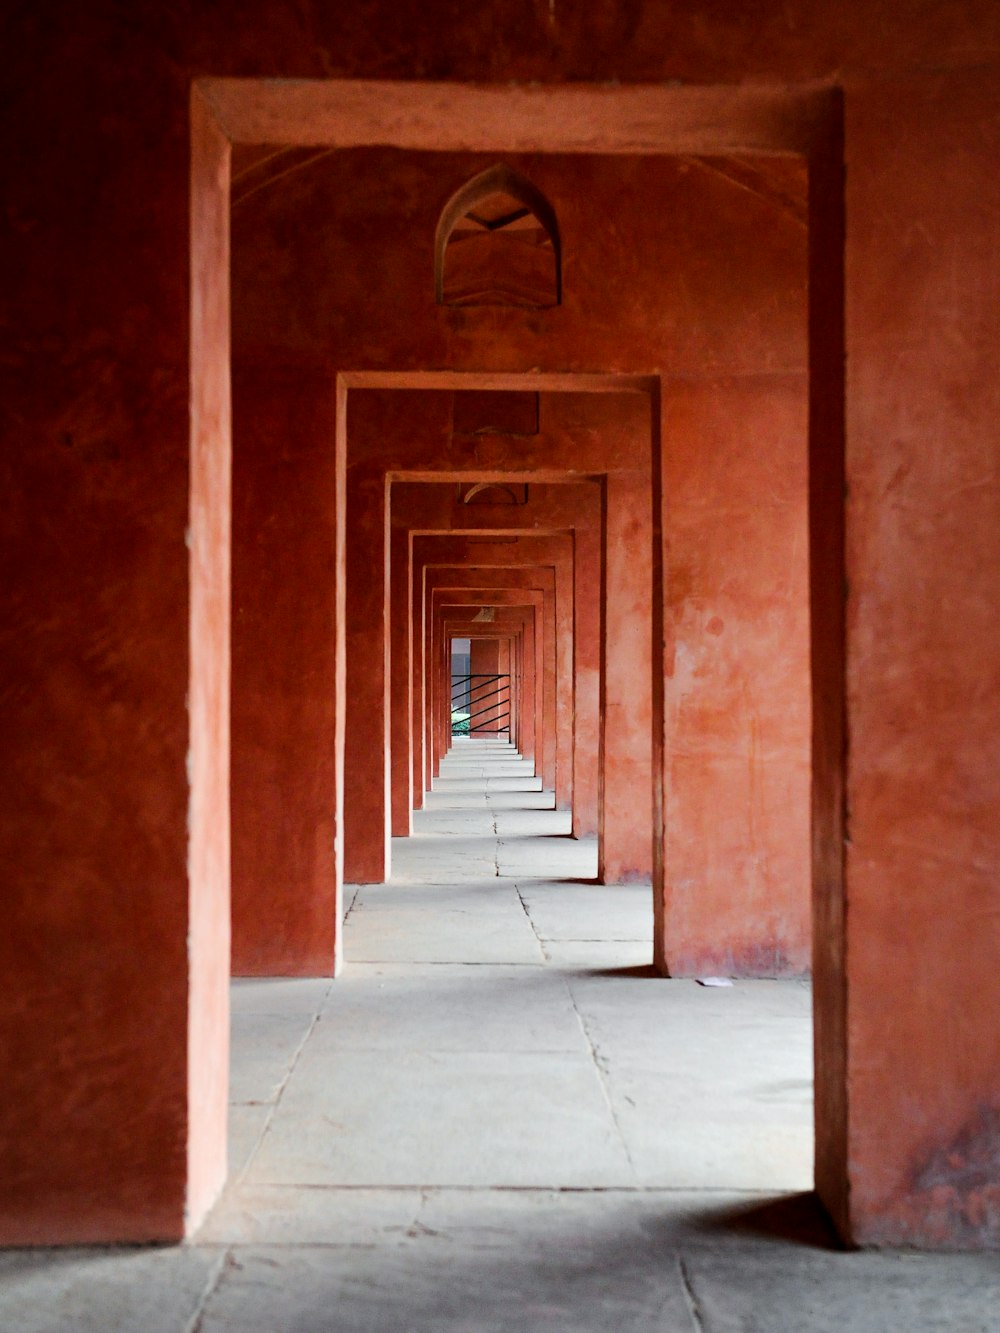 a long hallway lined with red walls and a clock